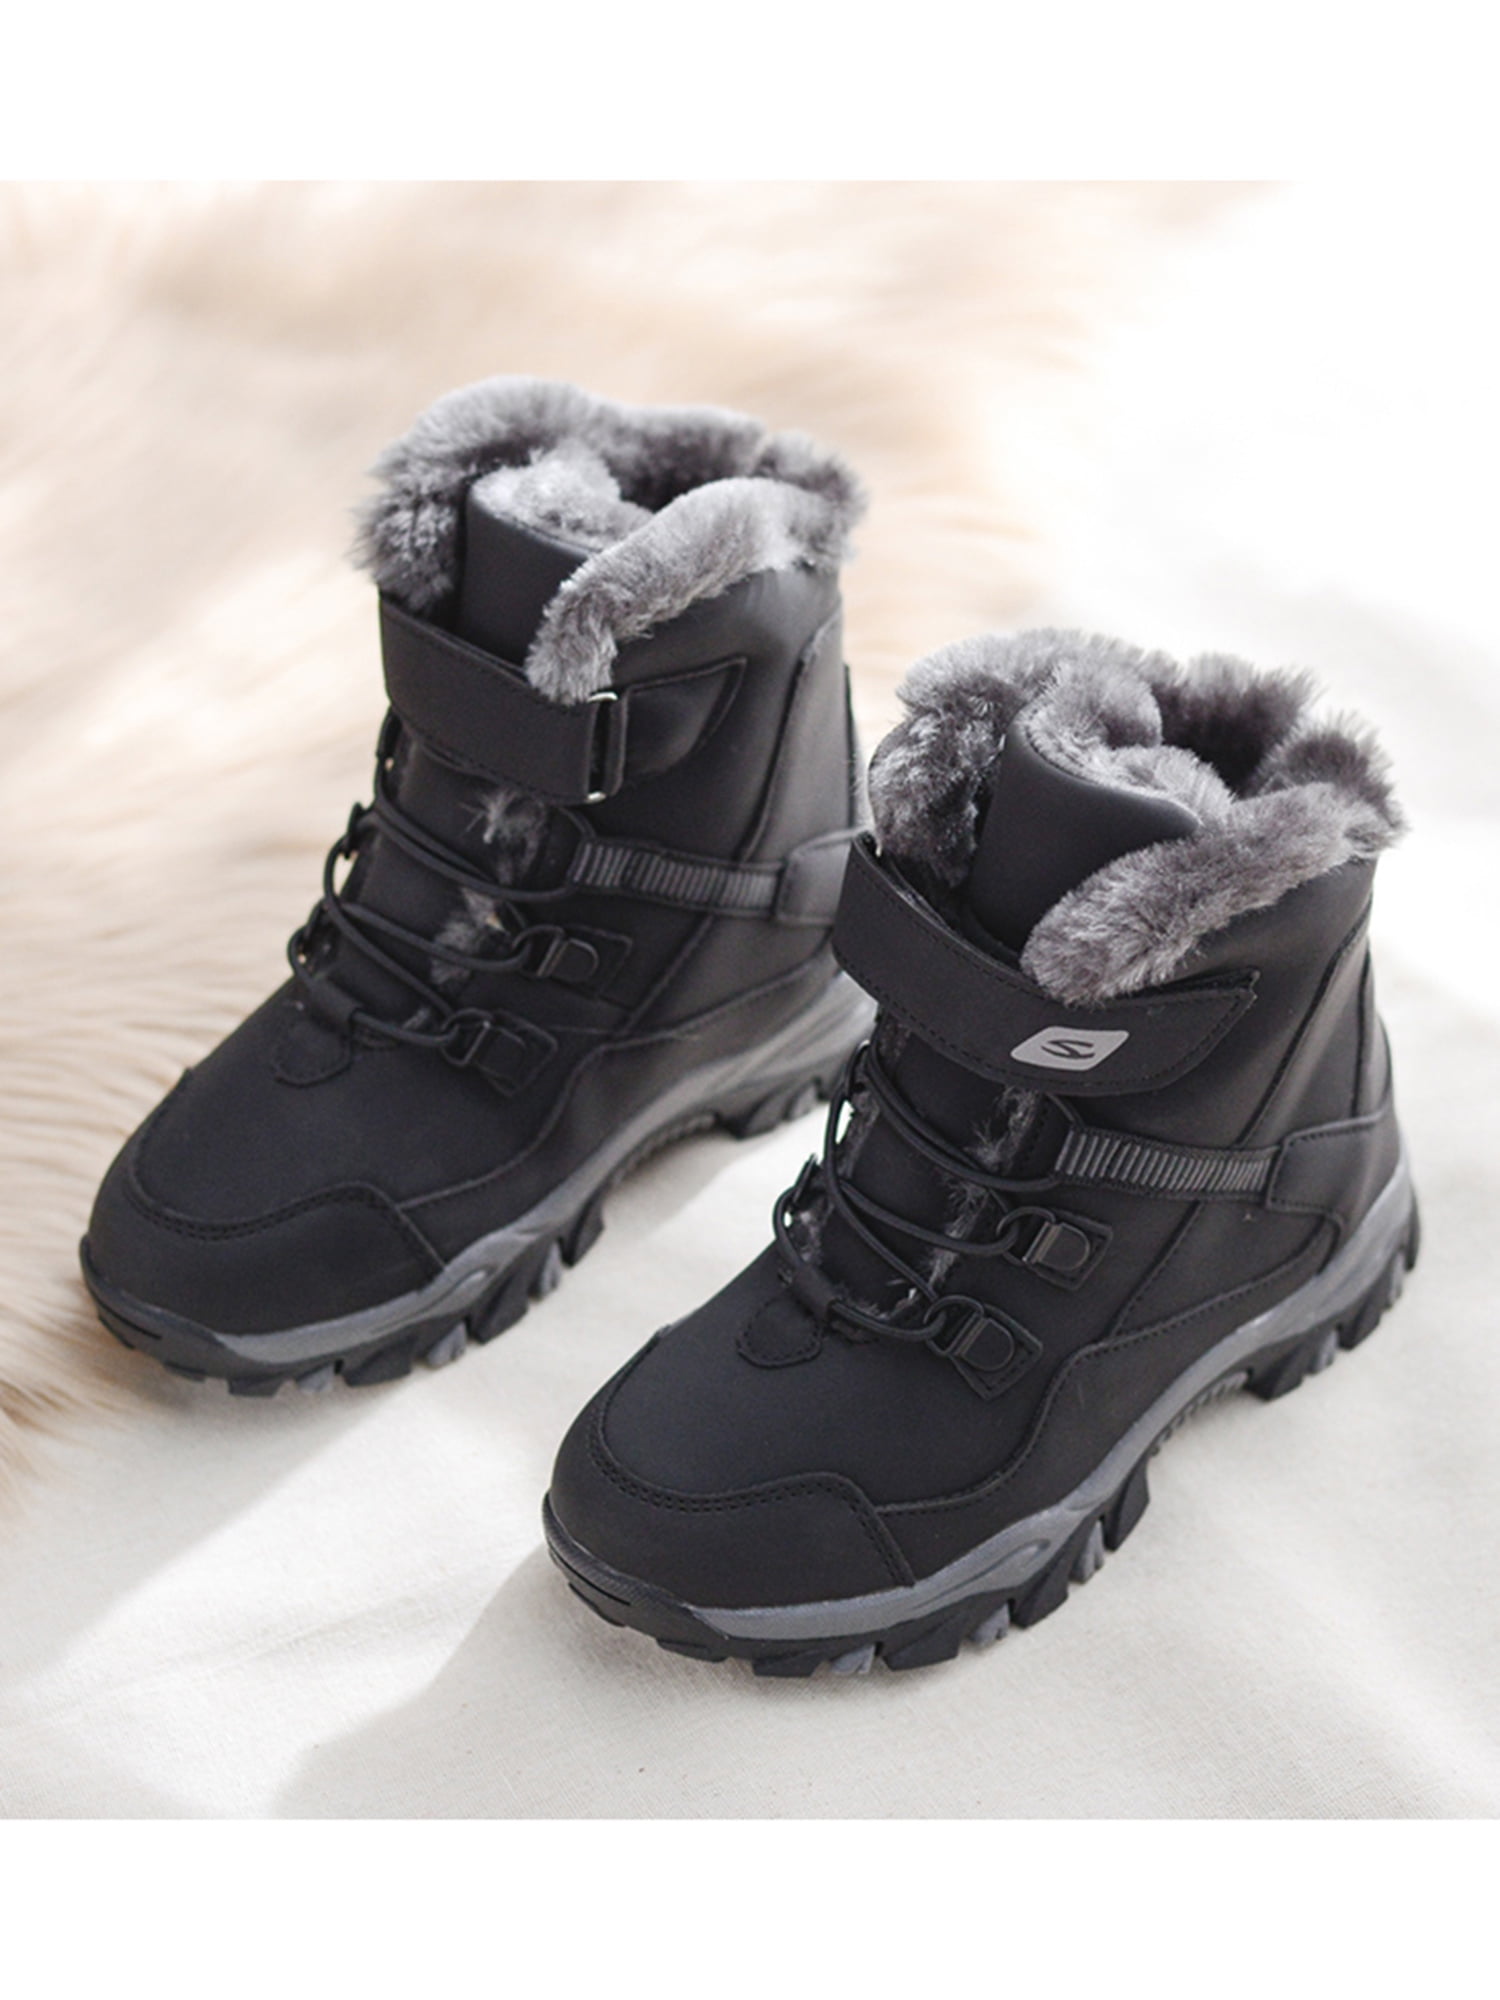 Warm Boys Snow Boots Fur Lined 